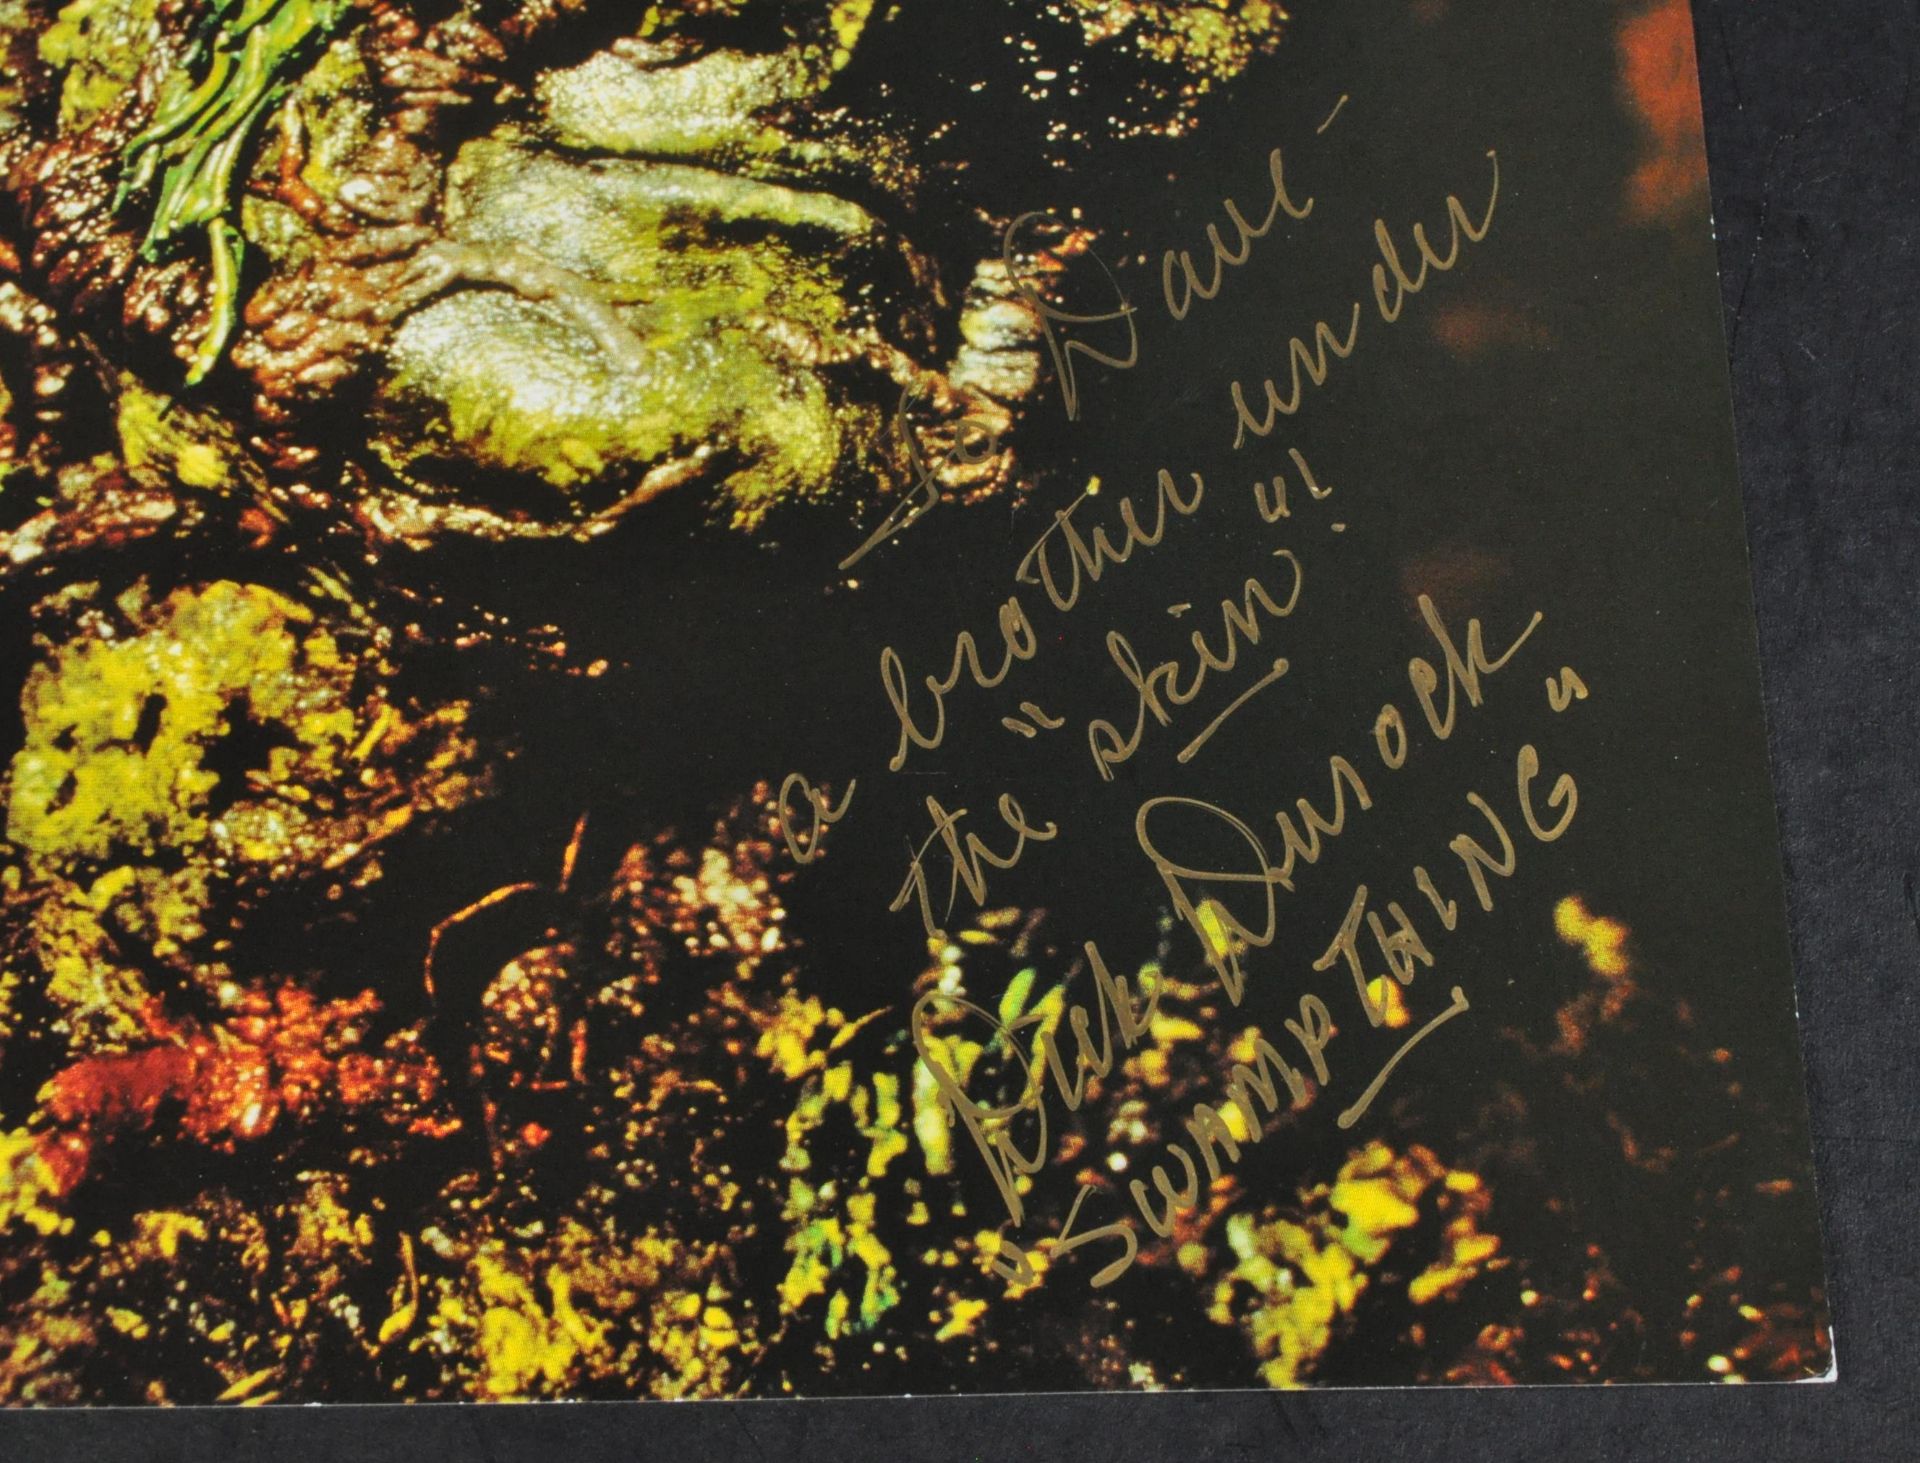 ESTATE OF DAVE PROWSE - DICK DUROCK - SWAMP THING - SIGNED PHOTO - Image 2 of 2